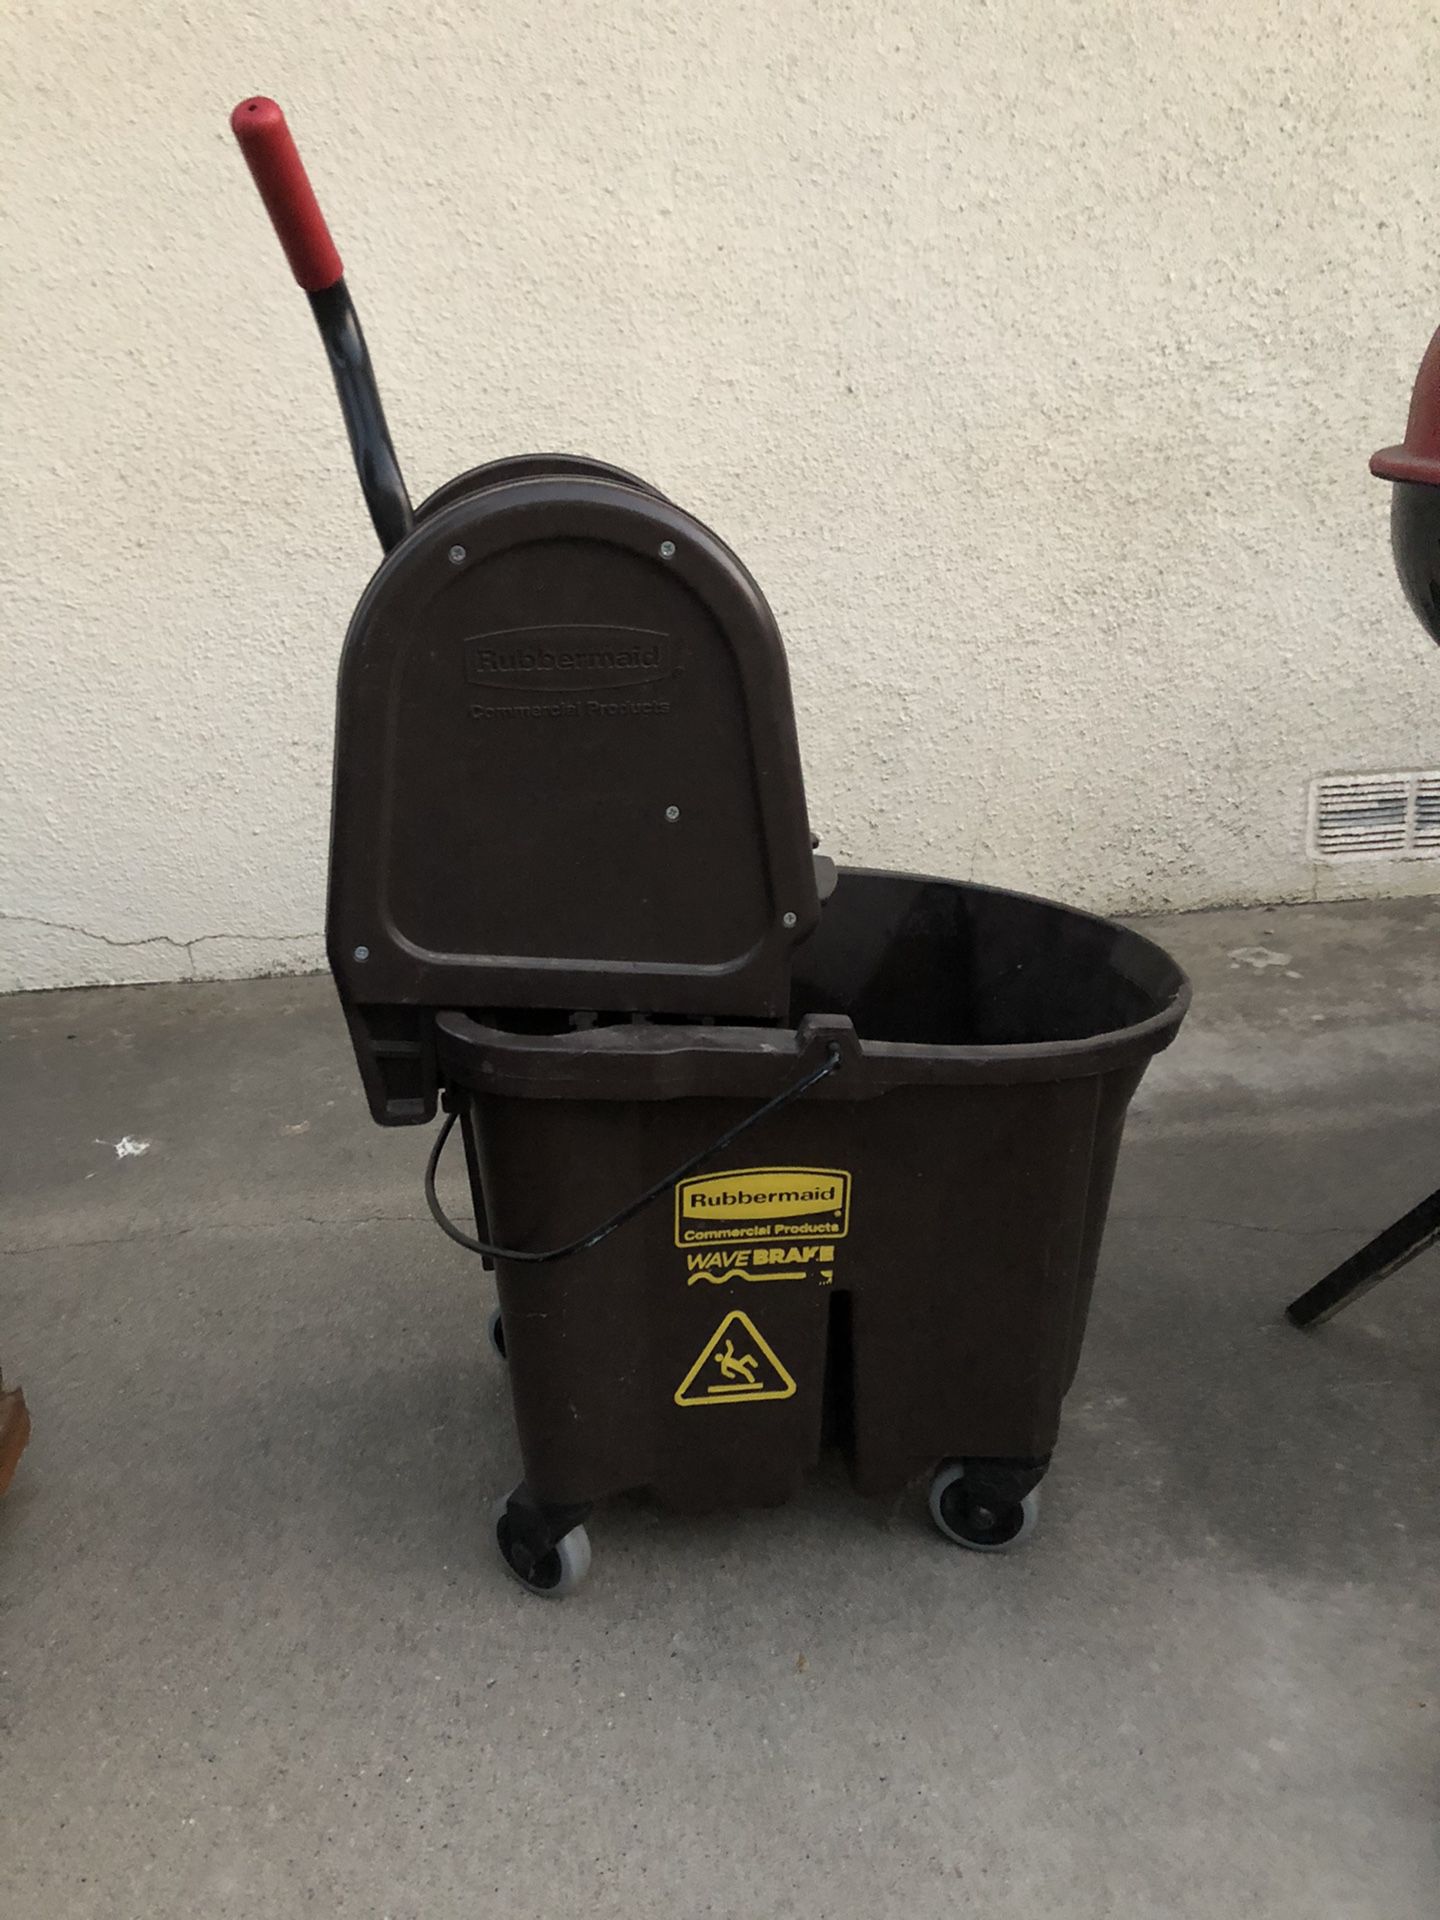 Rubber mail commercial mop bucket and wringer